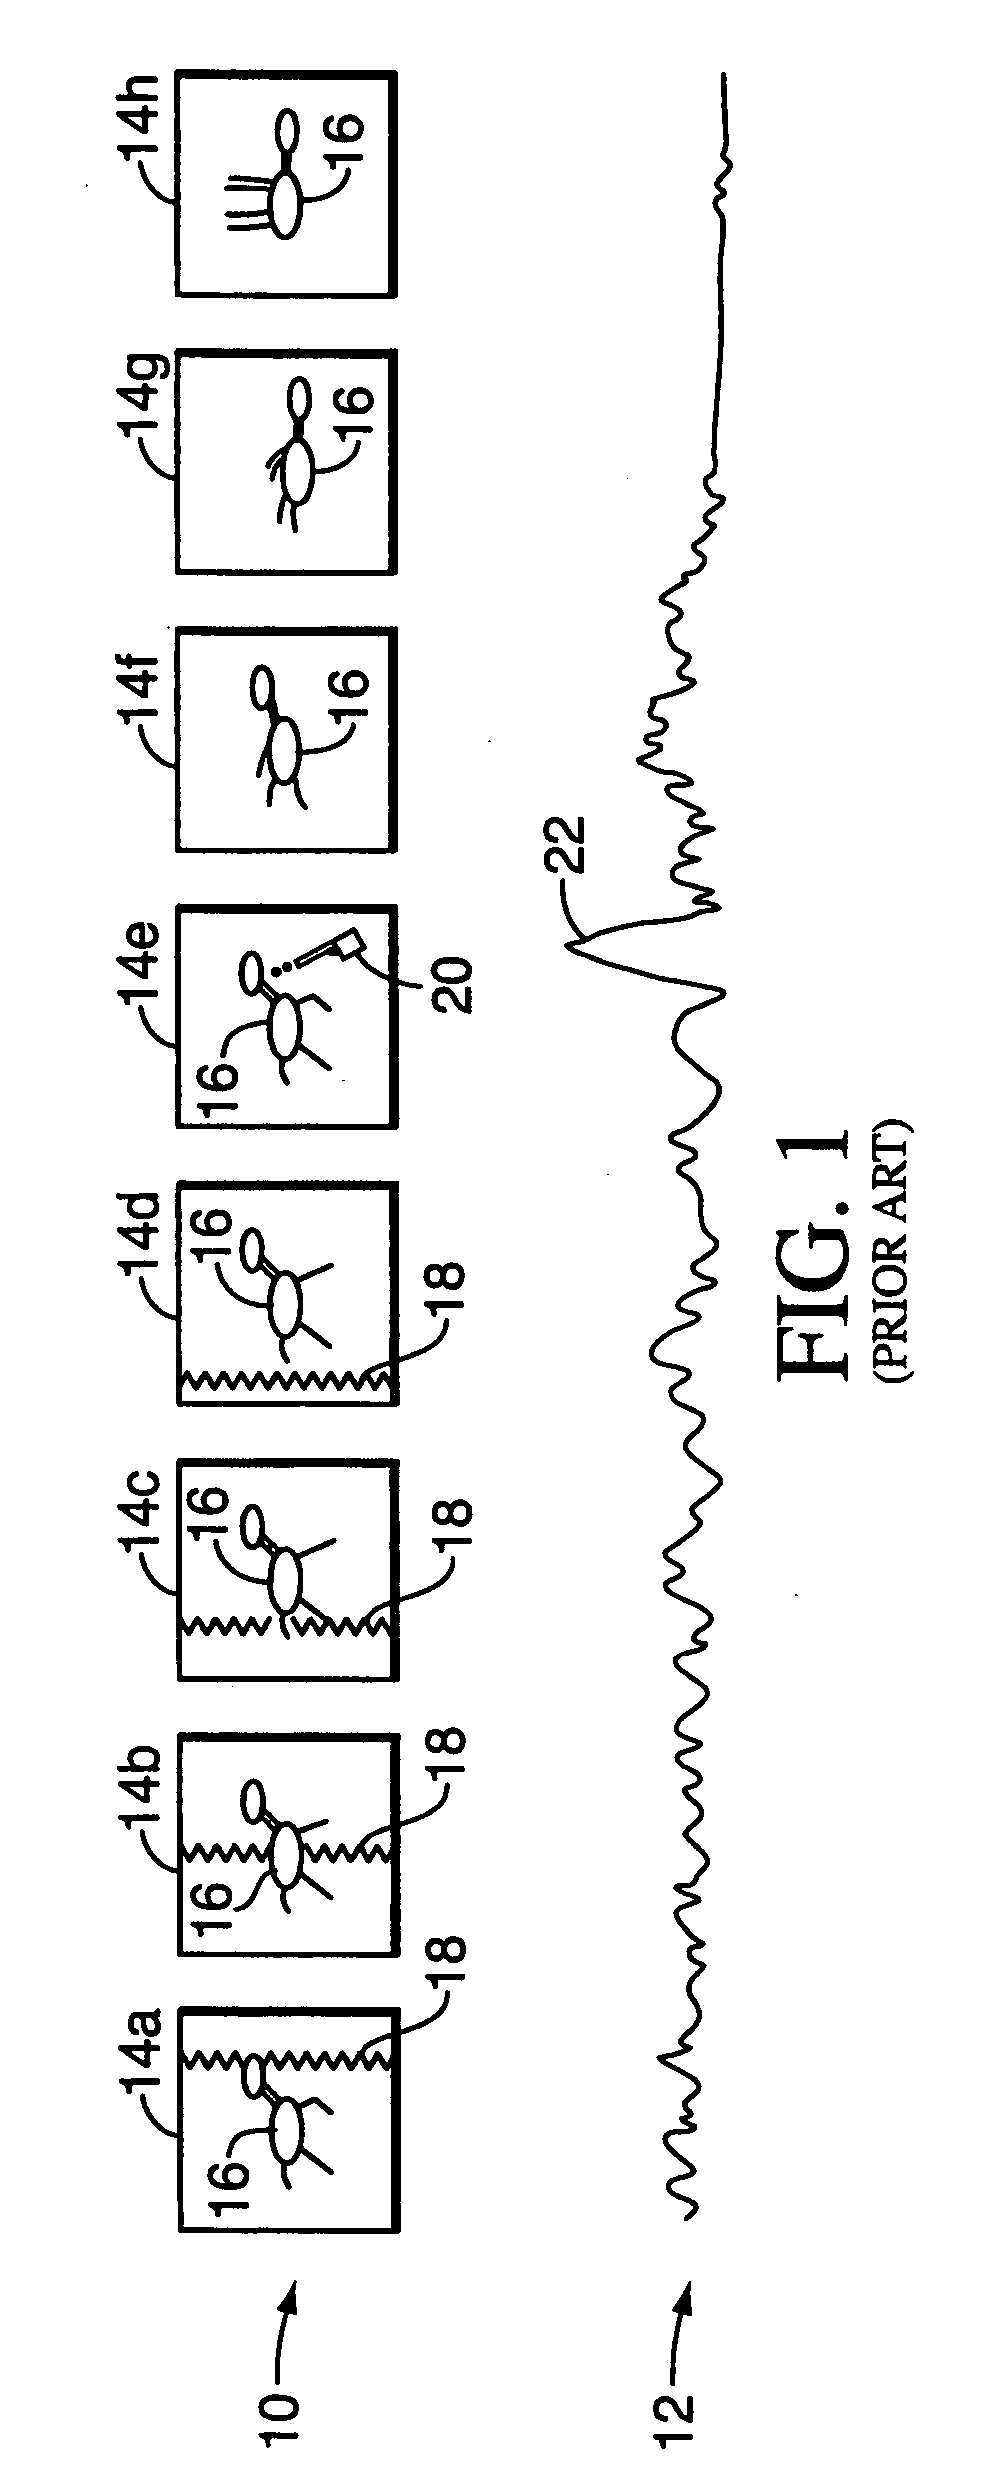 Method and apparatus for traversing a multiplexed data packet stream